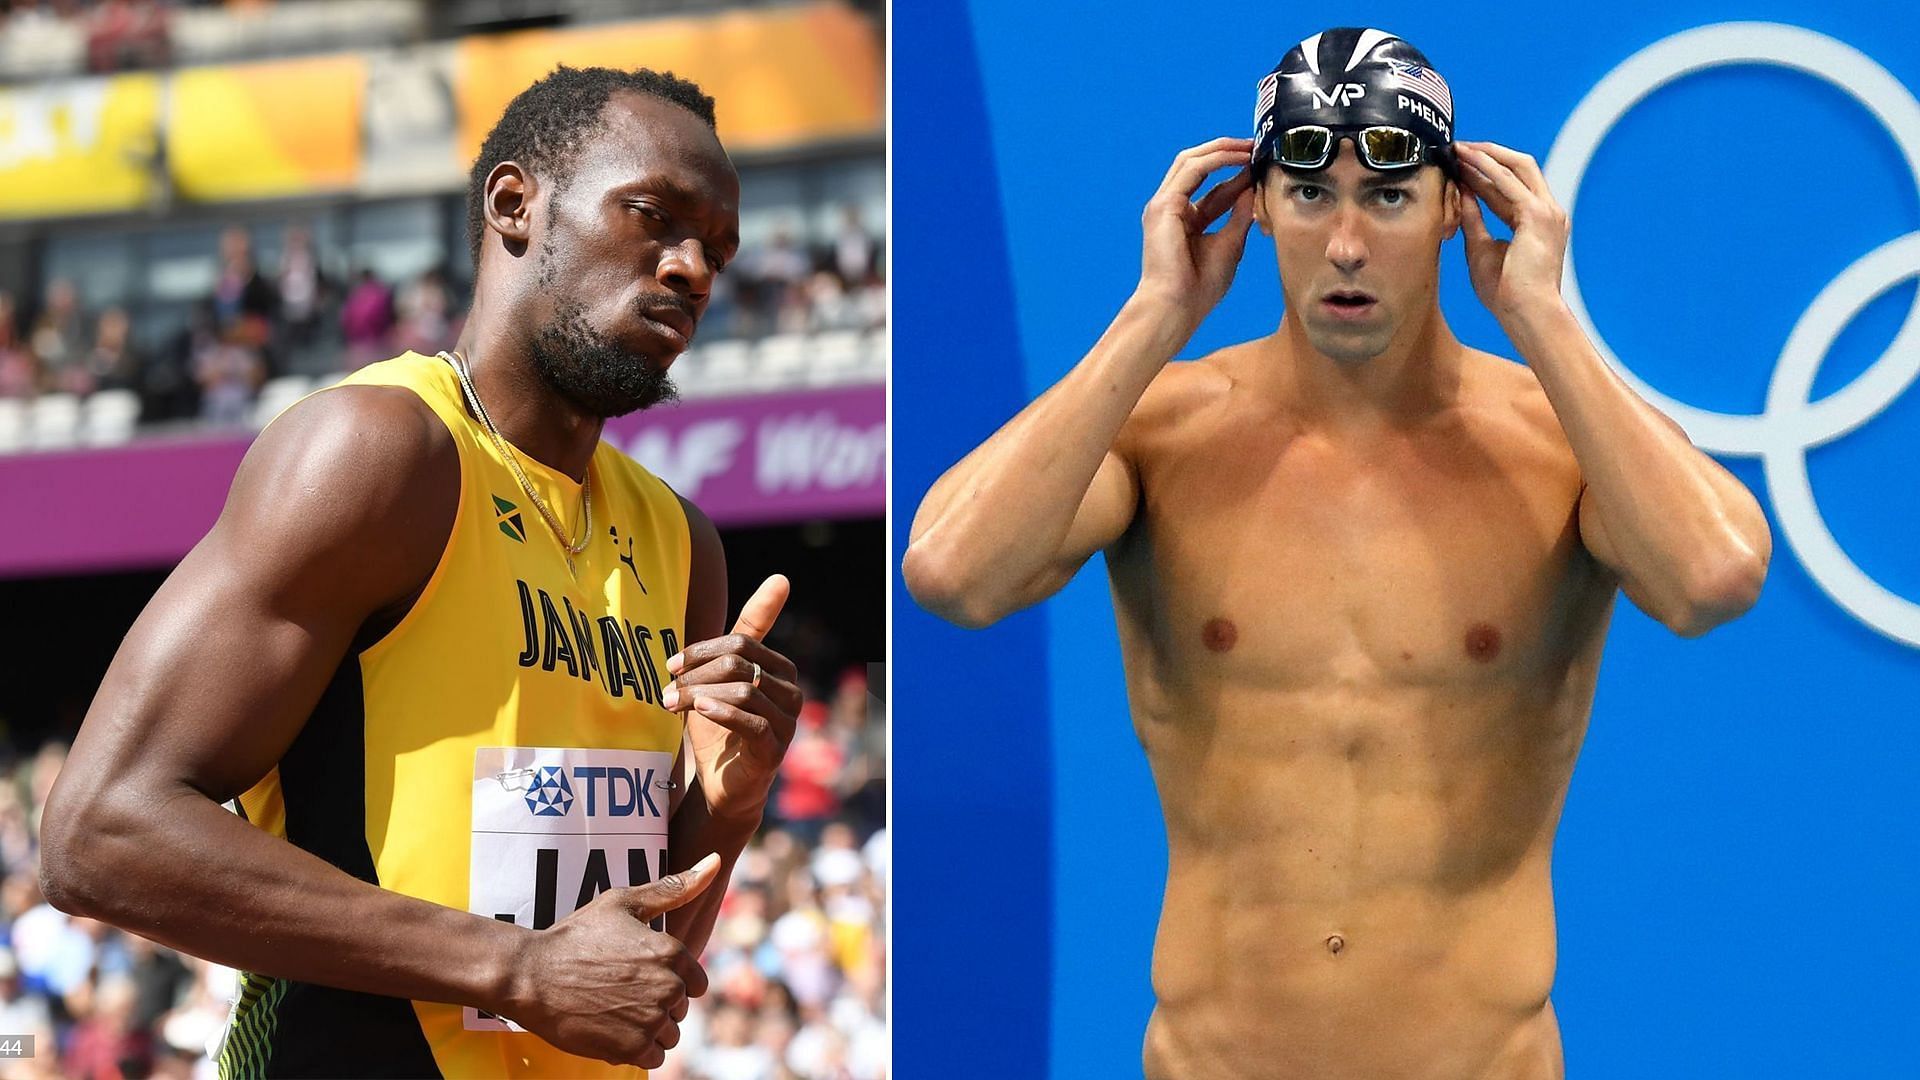 Usain Bolt and Michael Phelps set new world records in the 2008 Beijing Olympics.